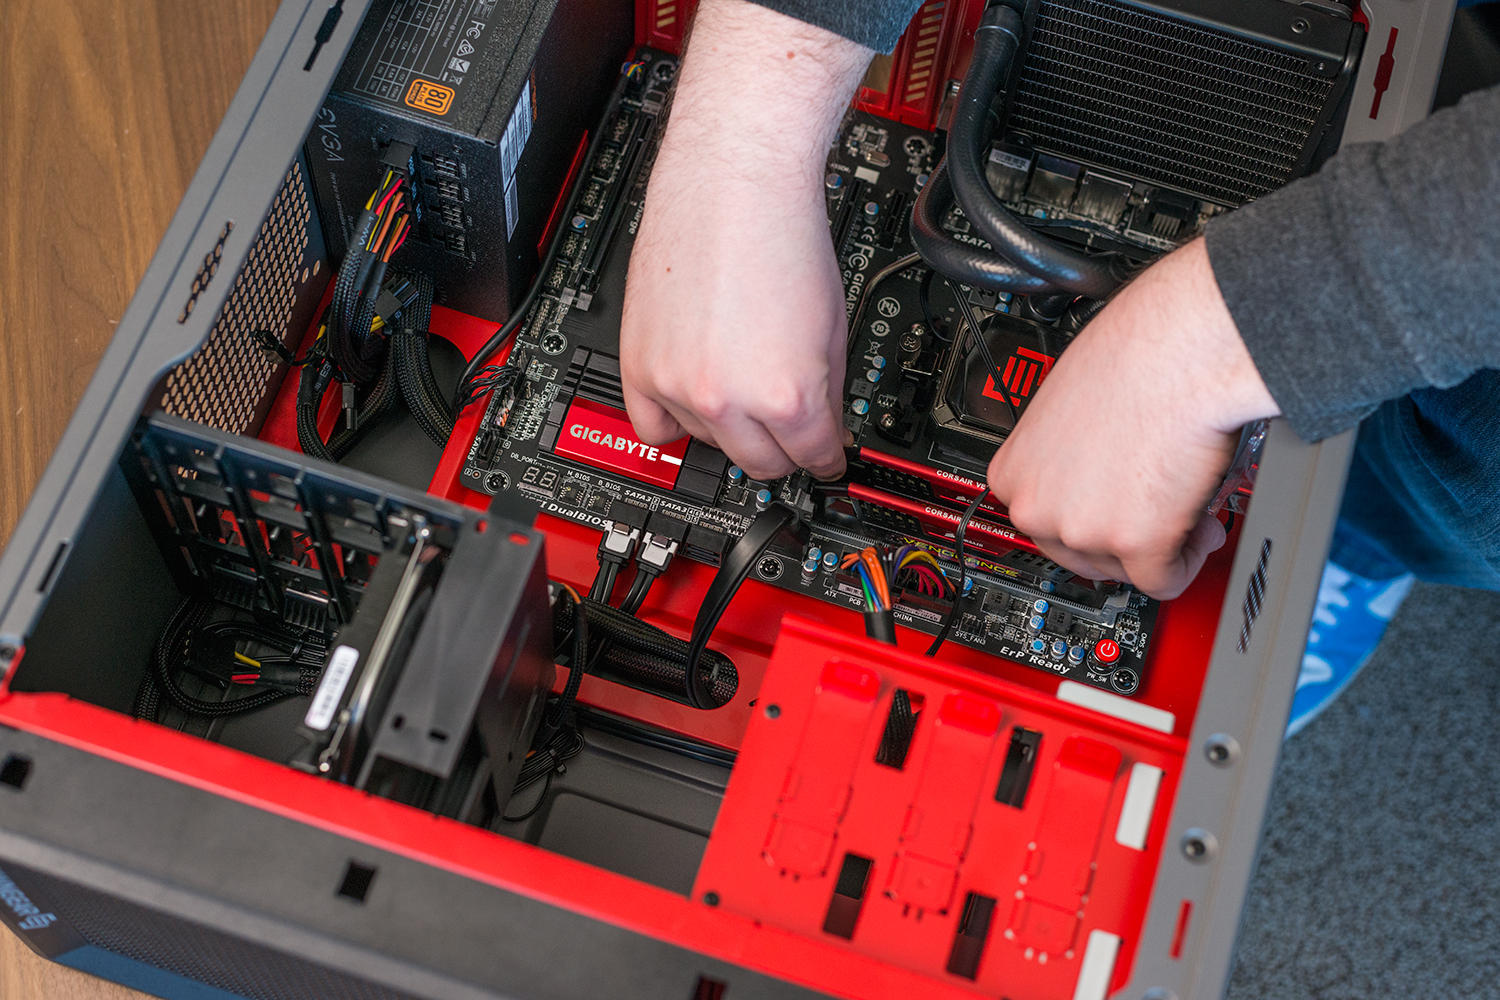 How to build a PC from scratch A beginner's guide for building your